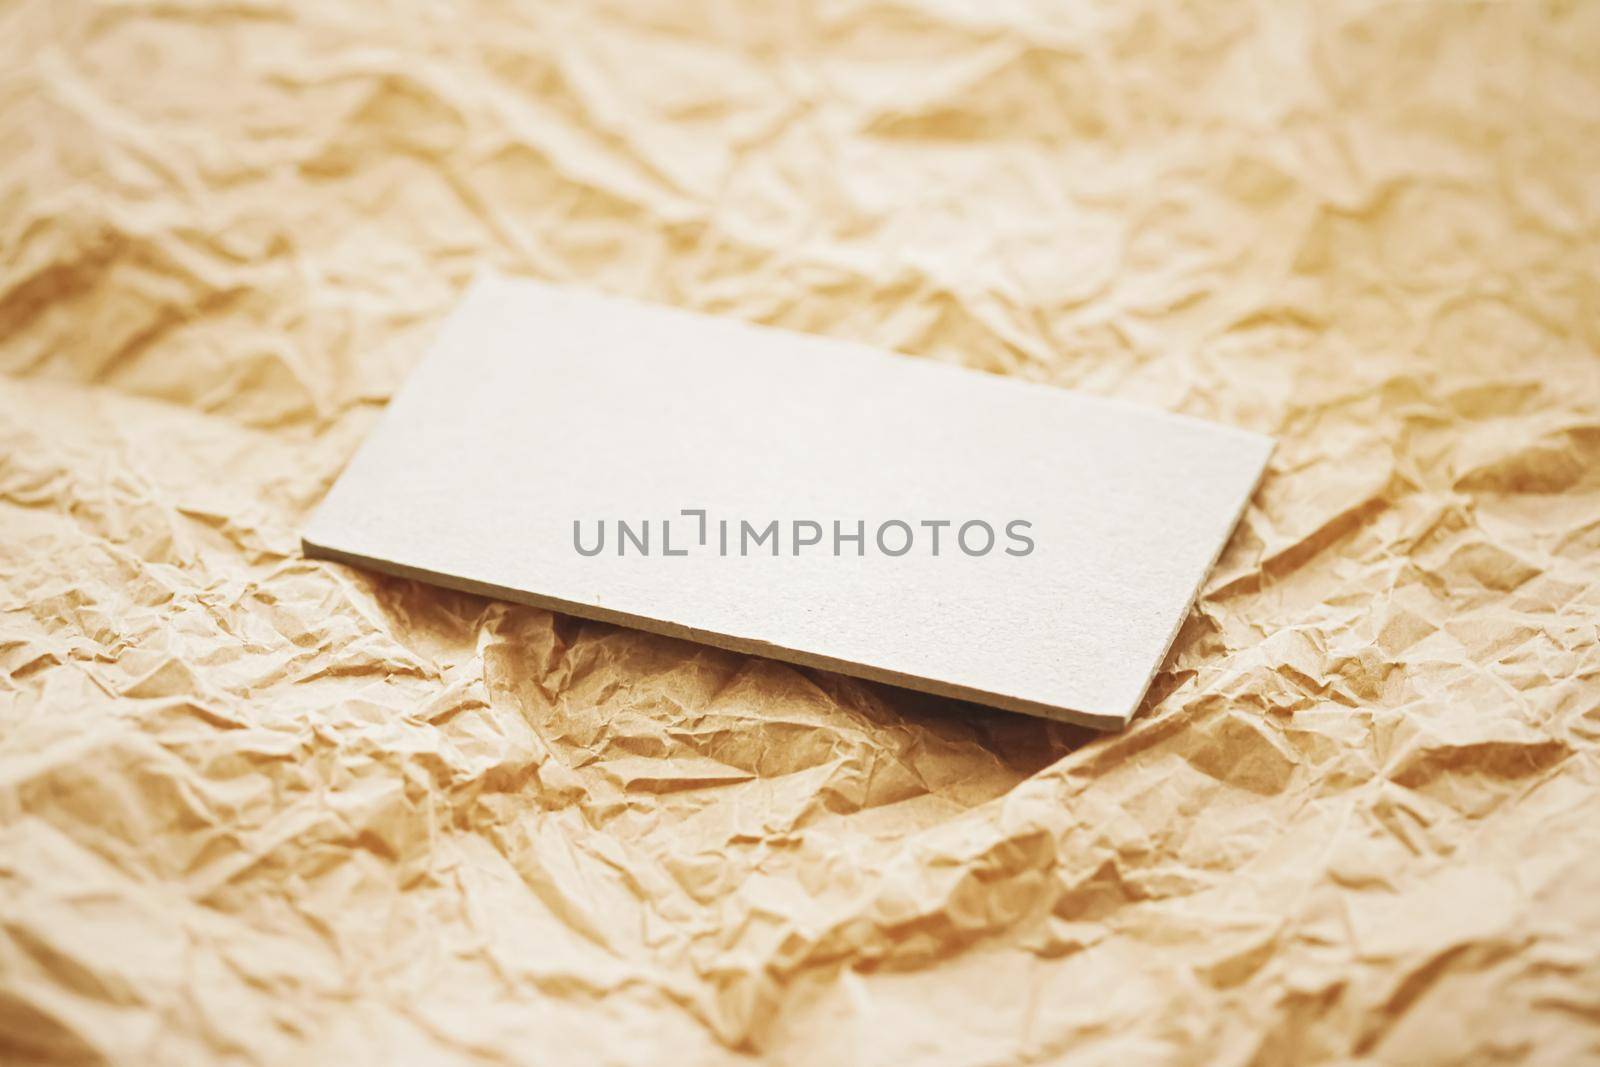 White business card flatlay on brown parchment paper background, luxury branding flat lay and brand identity design for mockups